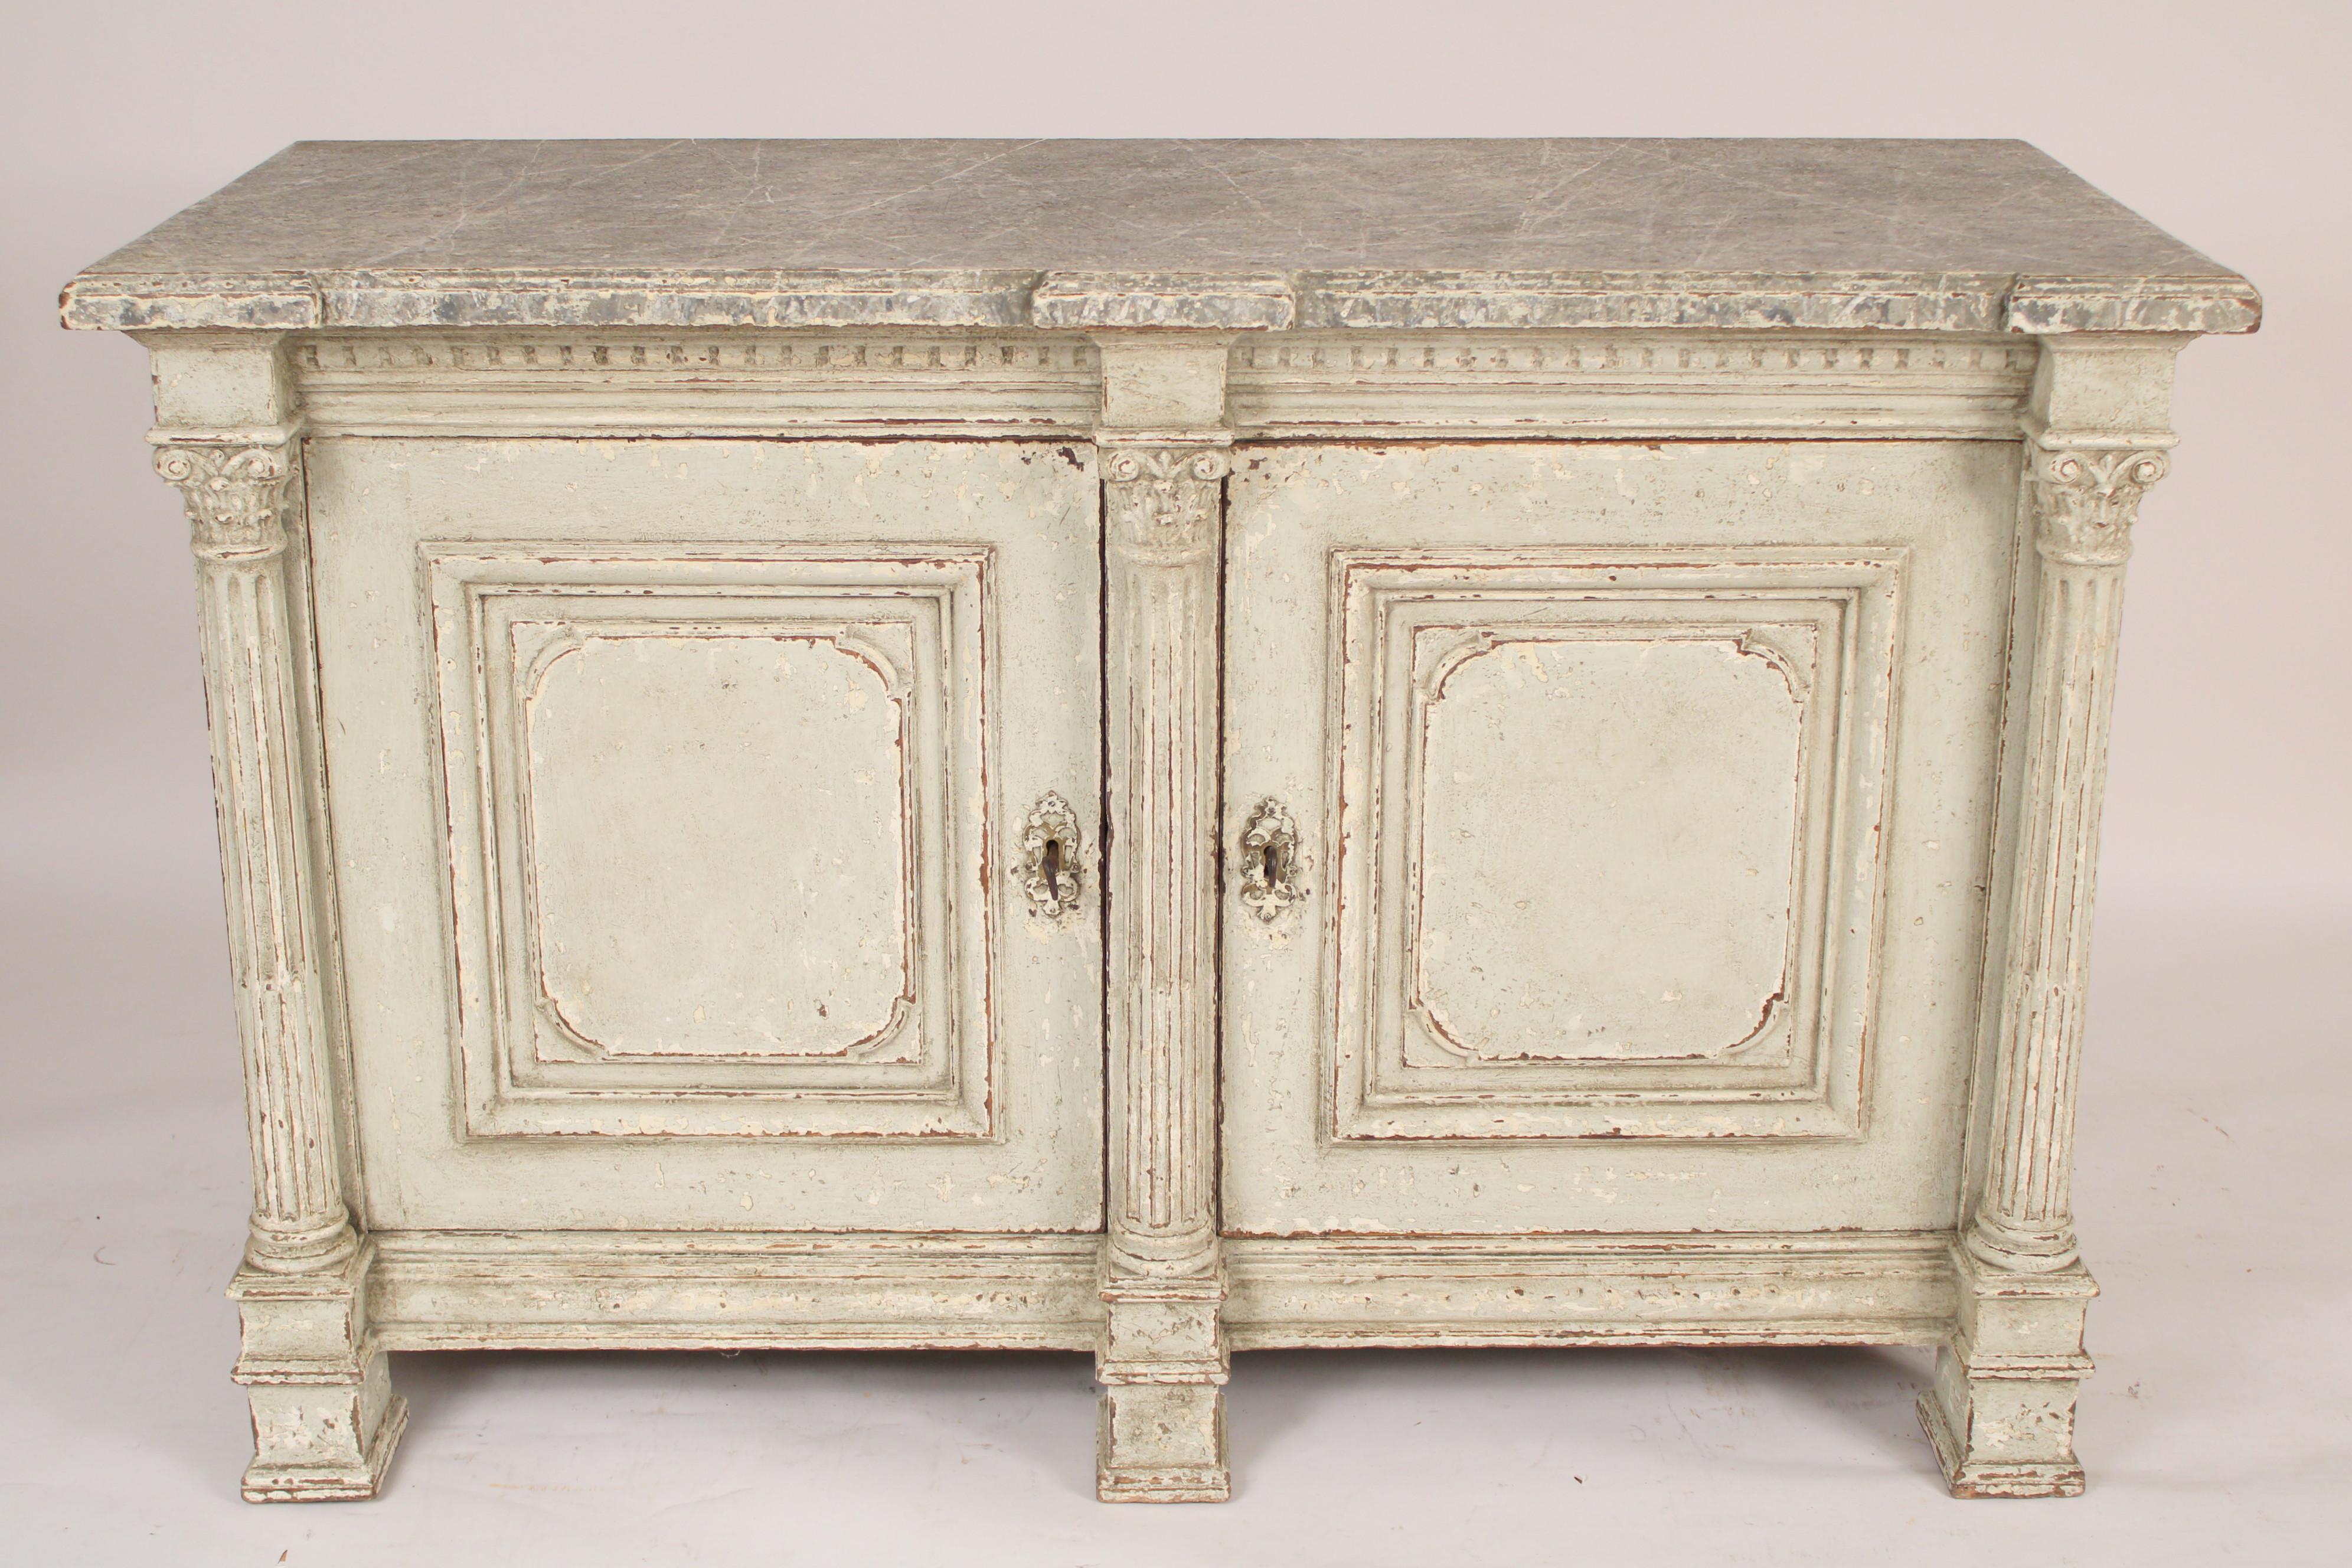 Antique Empire style painted buffet / cabinet, 19th century. The paint is later and 20th century. With a faux marble molded overhanging top over two cupboard doors separated and framed by 3 fluted columns with corinthian capitals, a stepped apron